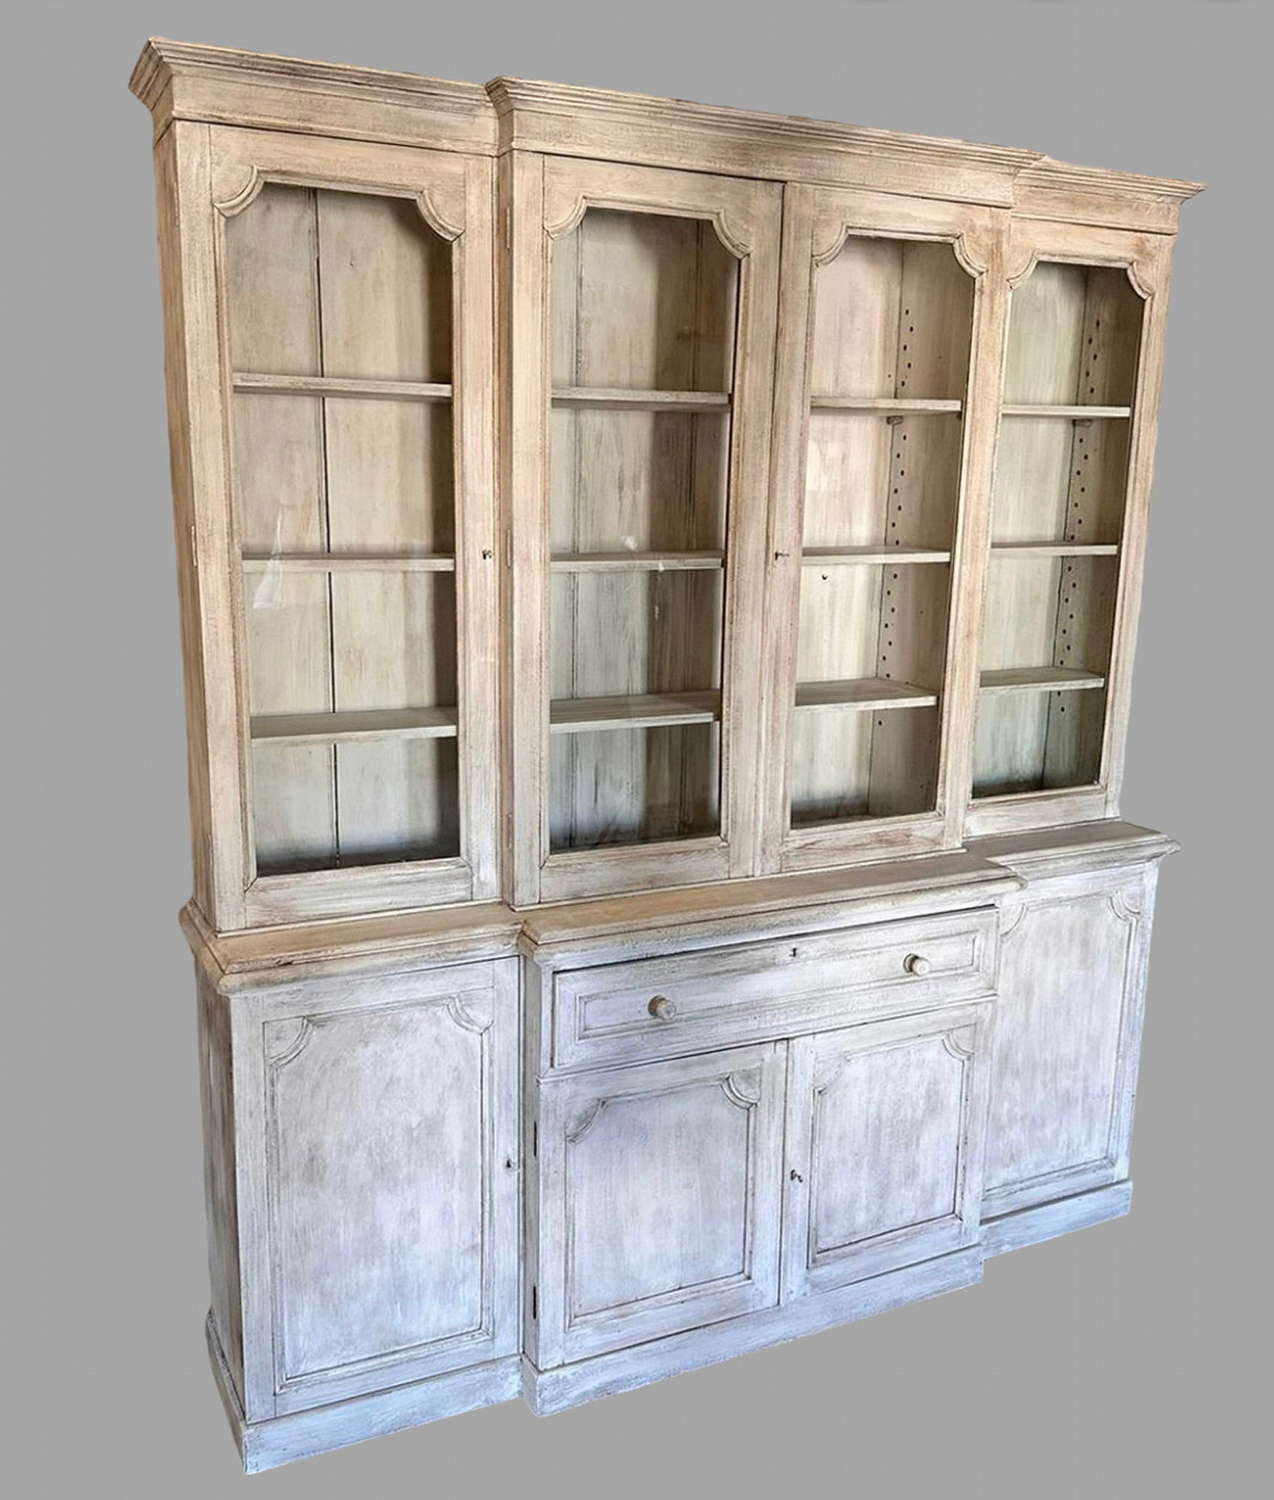 A 19th Century English Painted Breakfront Bookcase